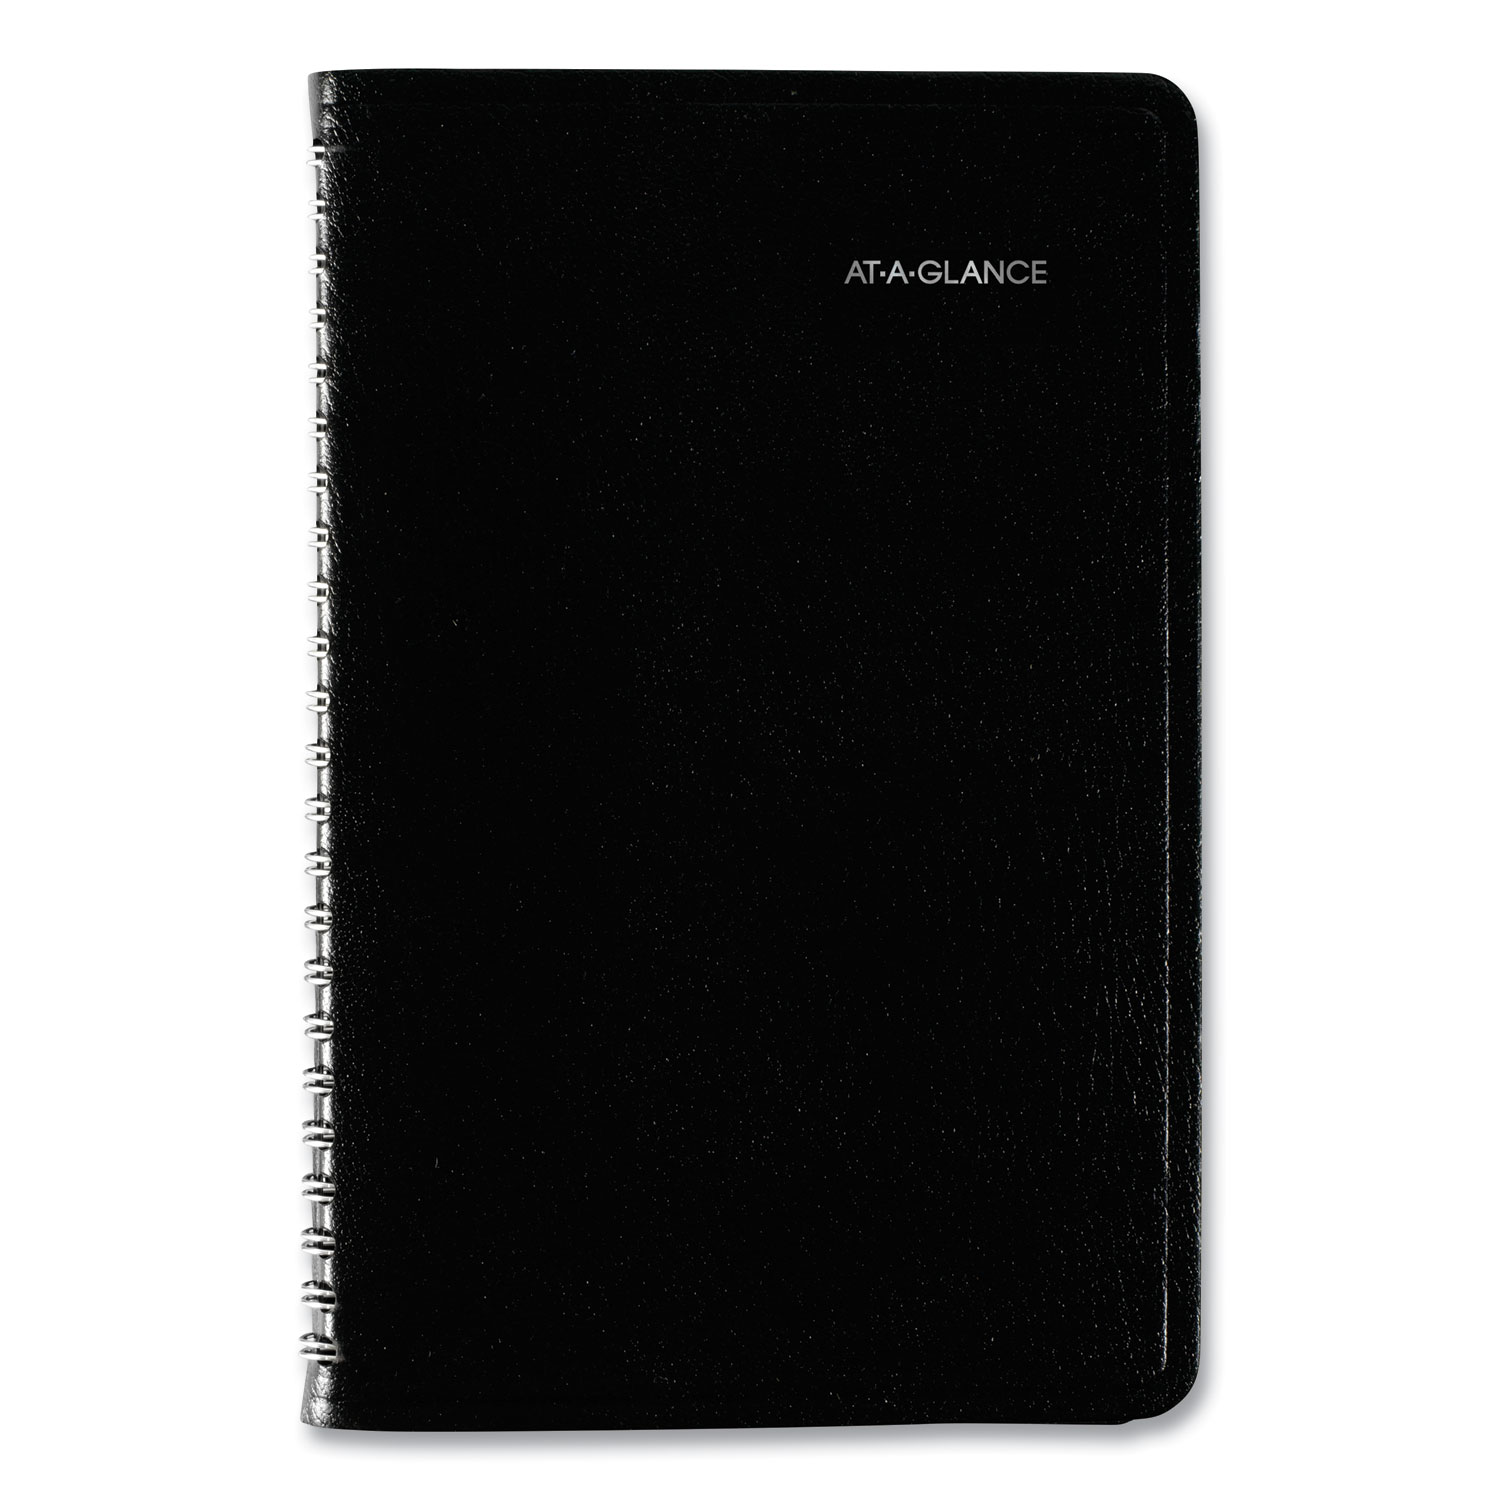  AT-A-GLANCE G200-00 Block Format Weekly Appointment Book, 8 x 4 7/8, Black, 2020 (AAGG20000) 